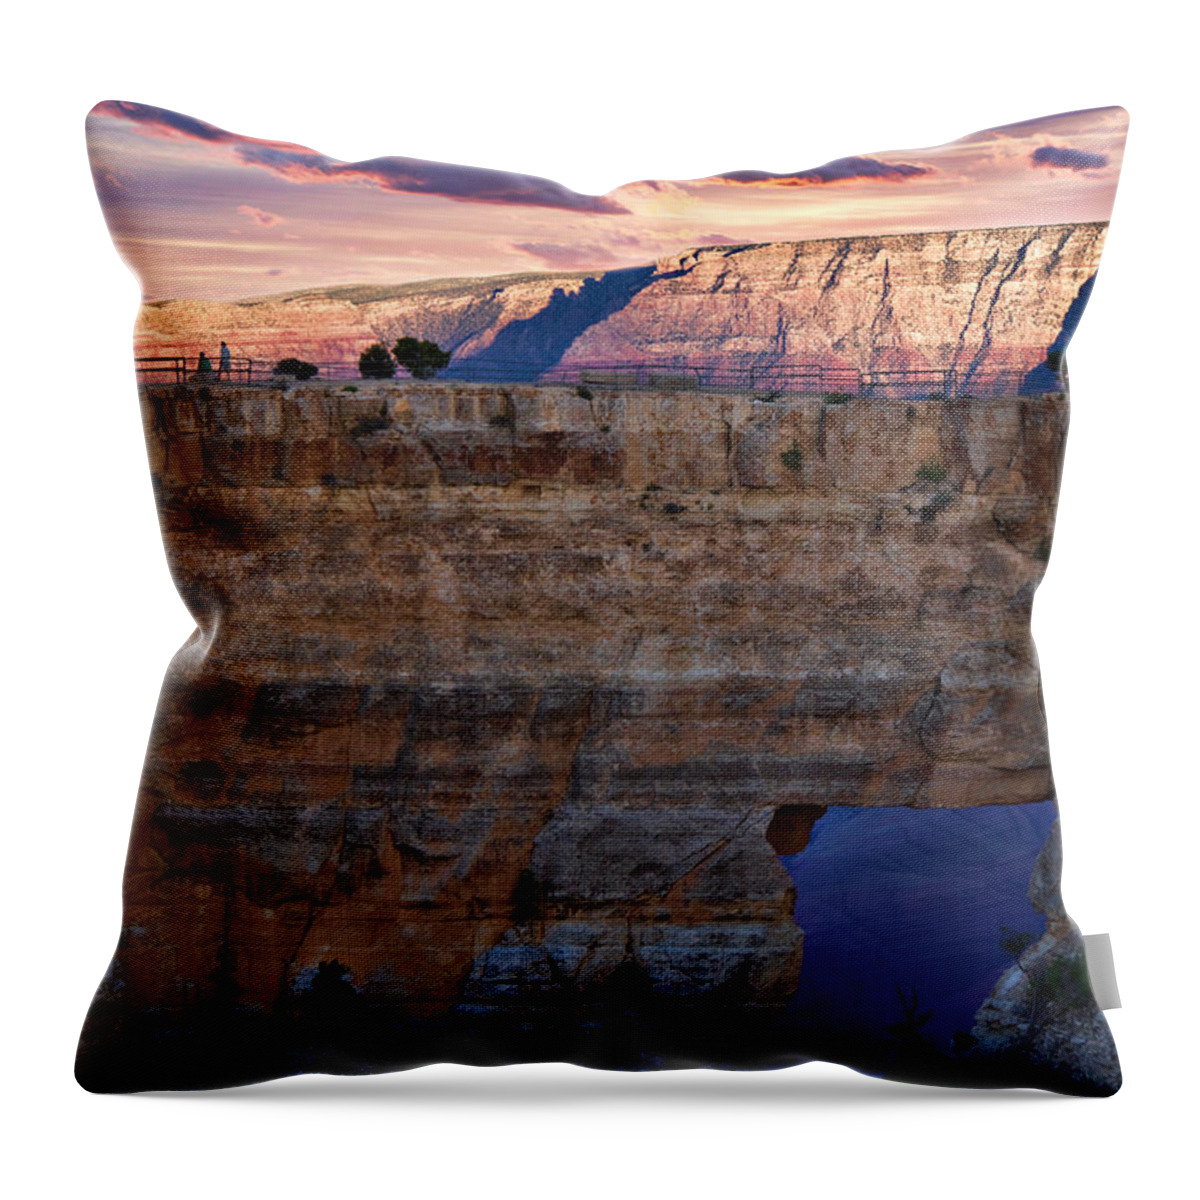 Az Throw Pillow featuring the photograph Angels Window by Lana Trussell